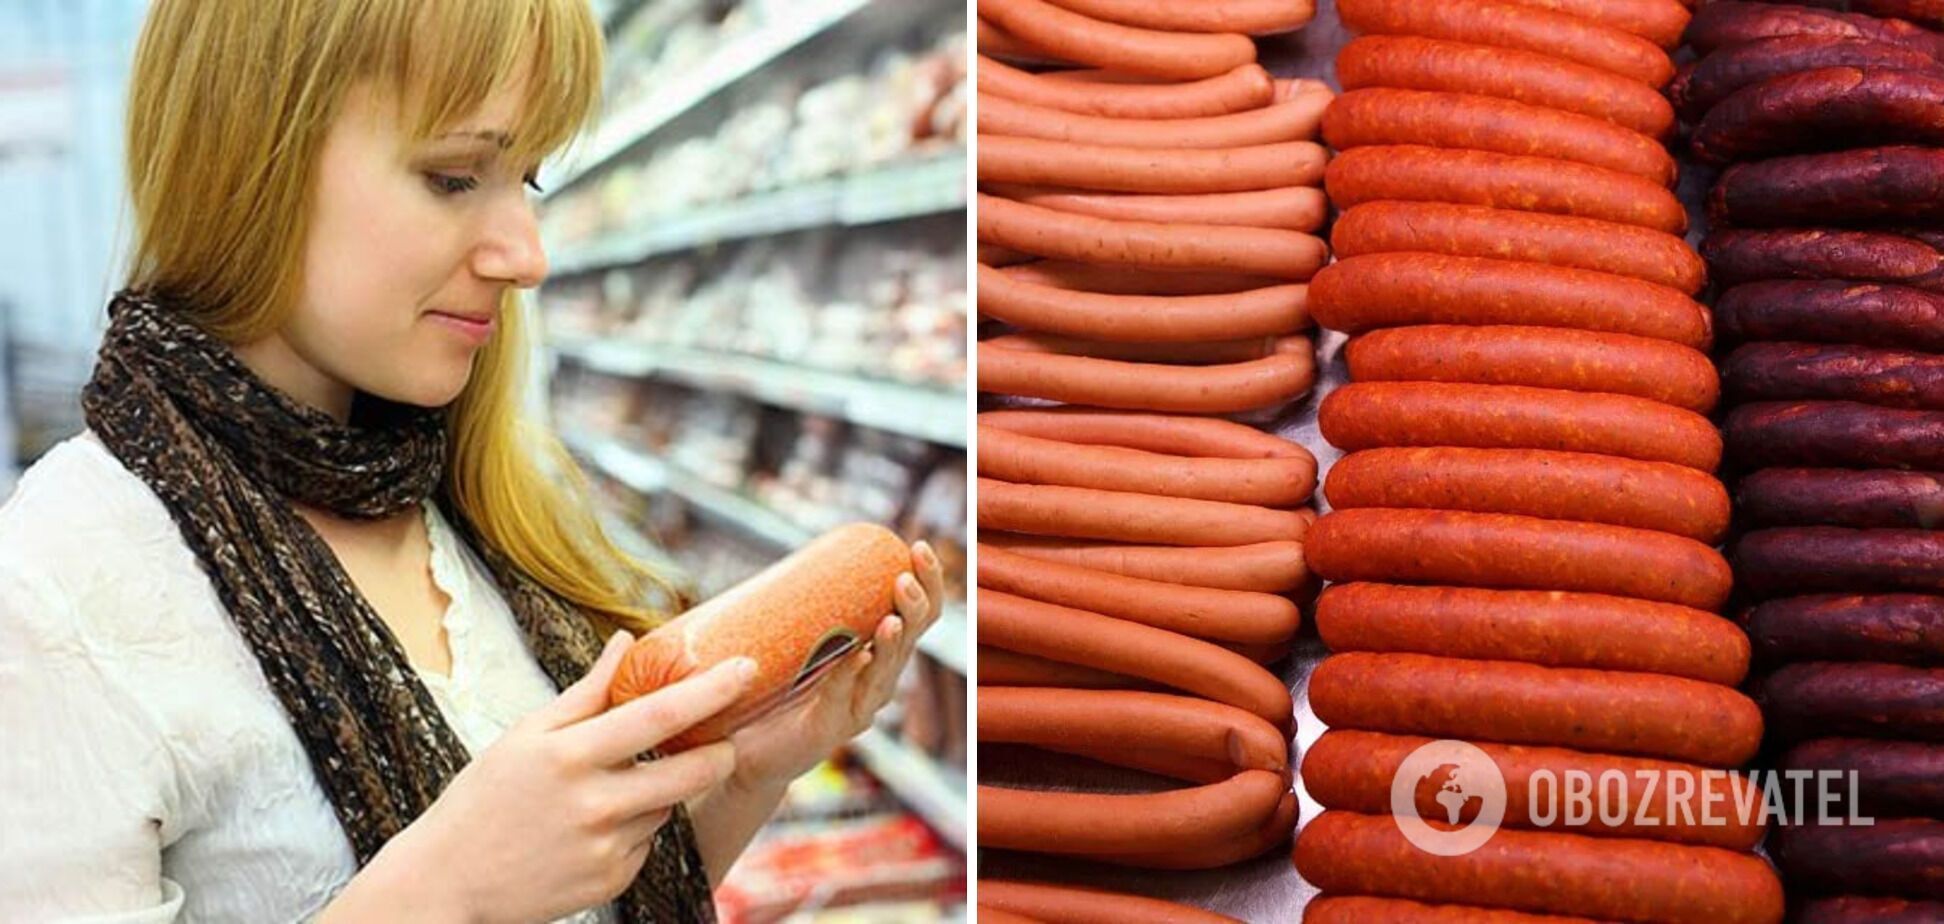 Don't waste your money on these products: expert names the most dangerous food